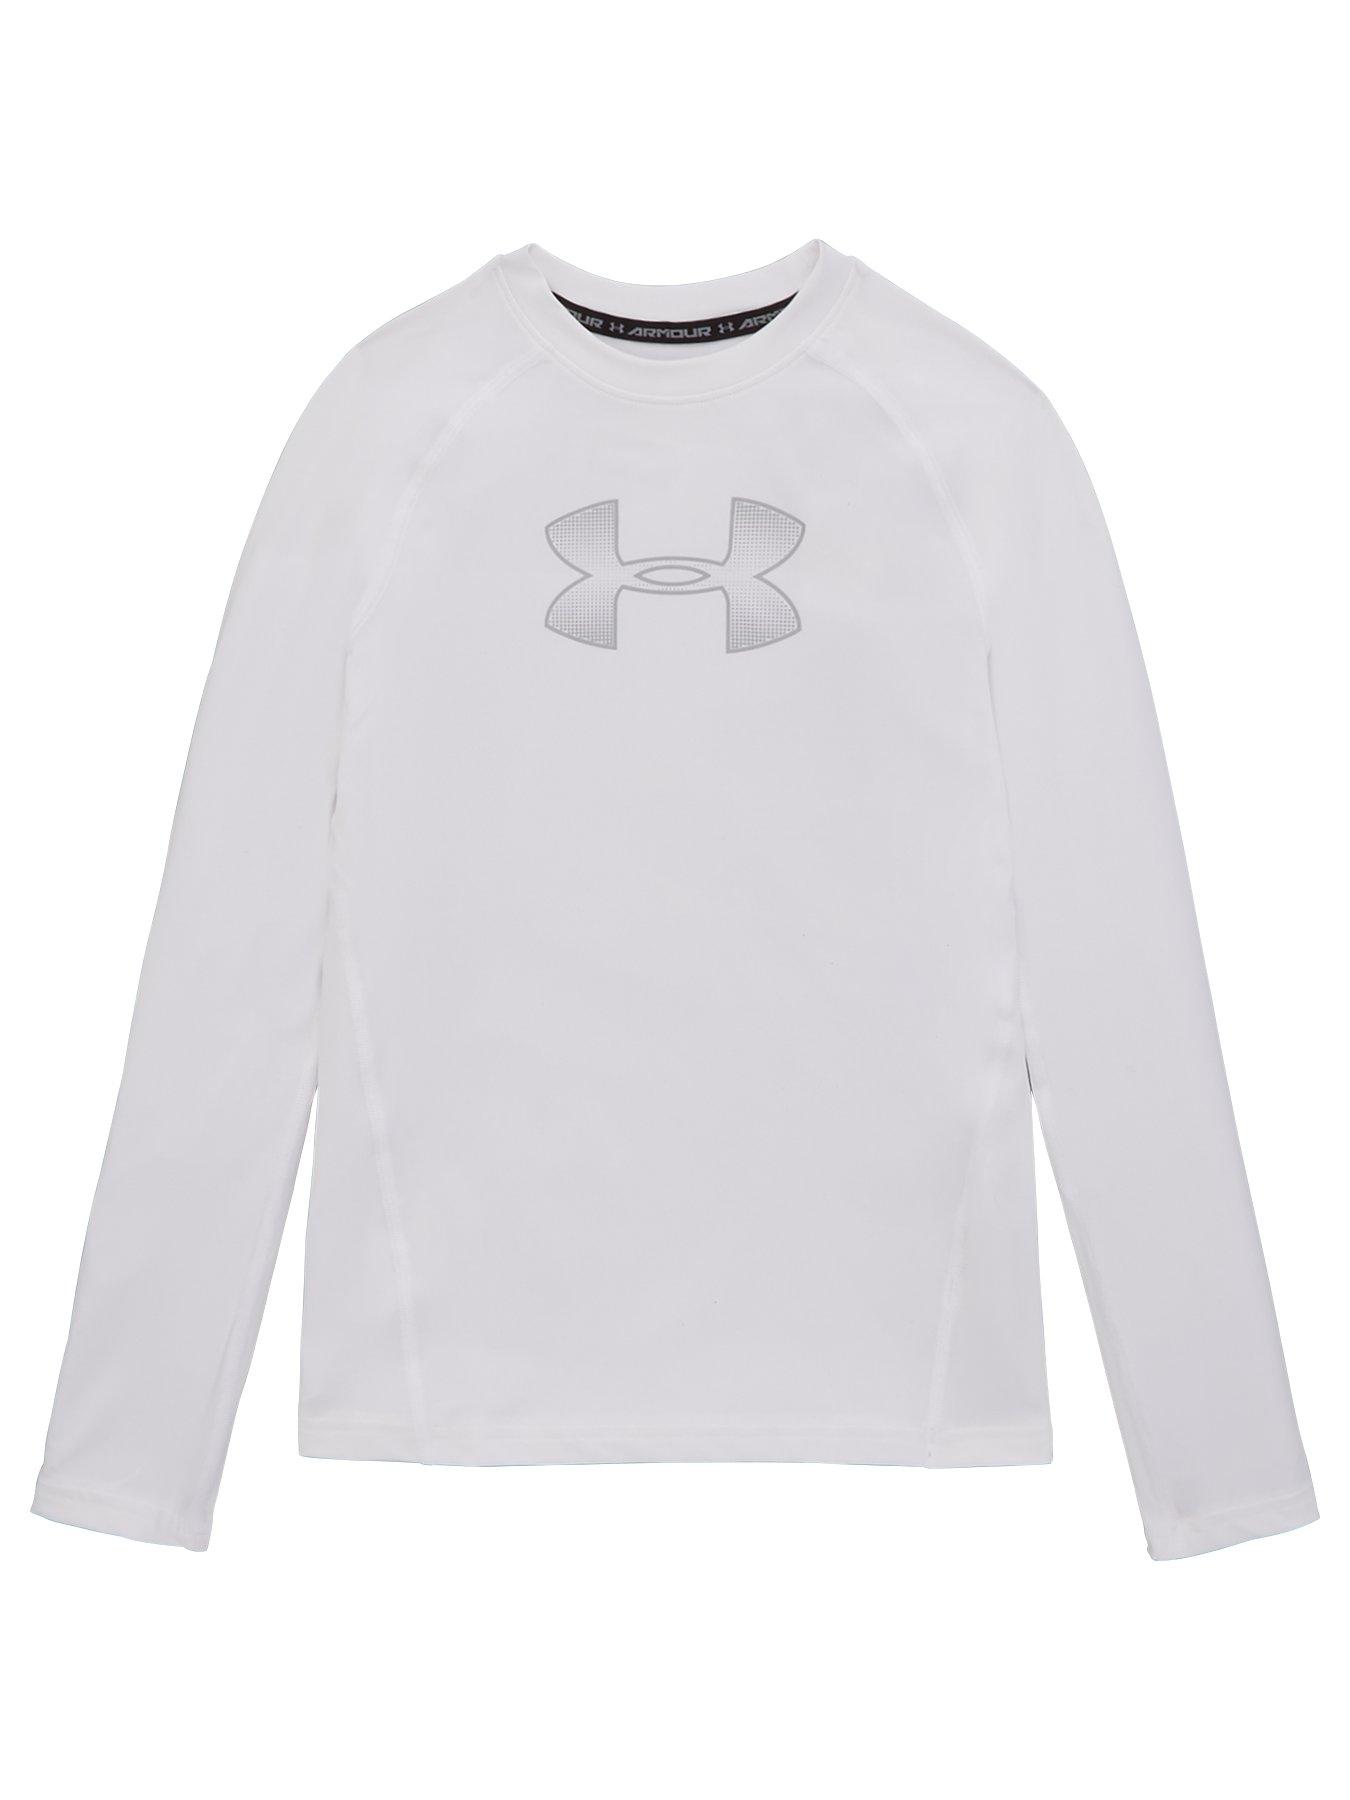 youth under armour long sleeve